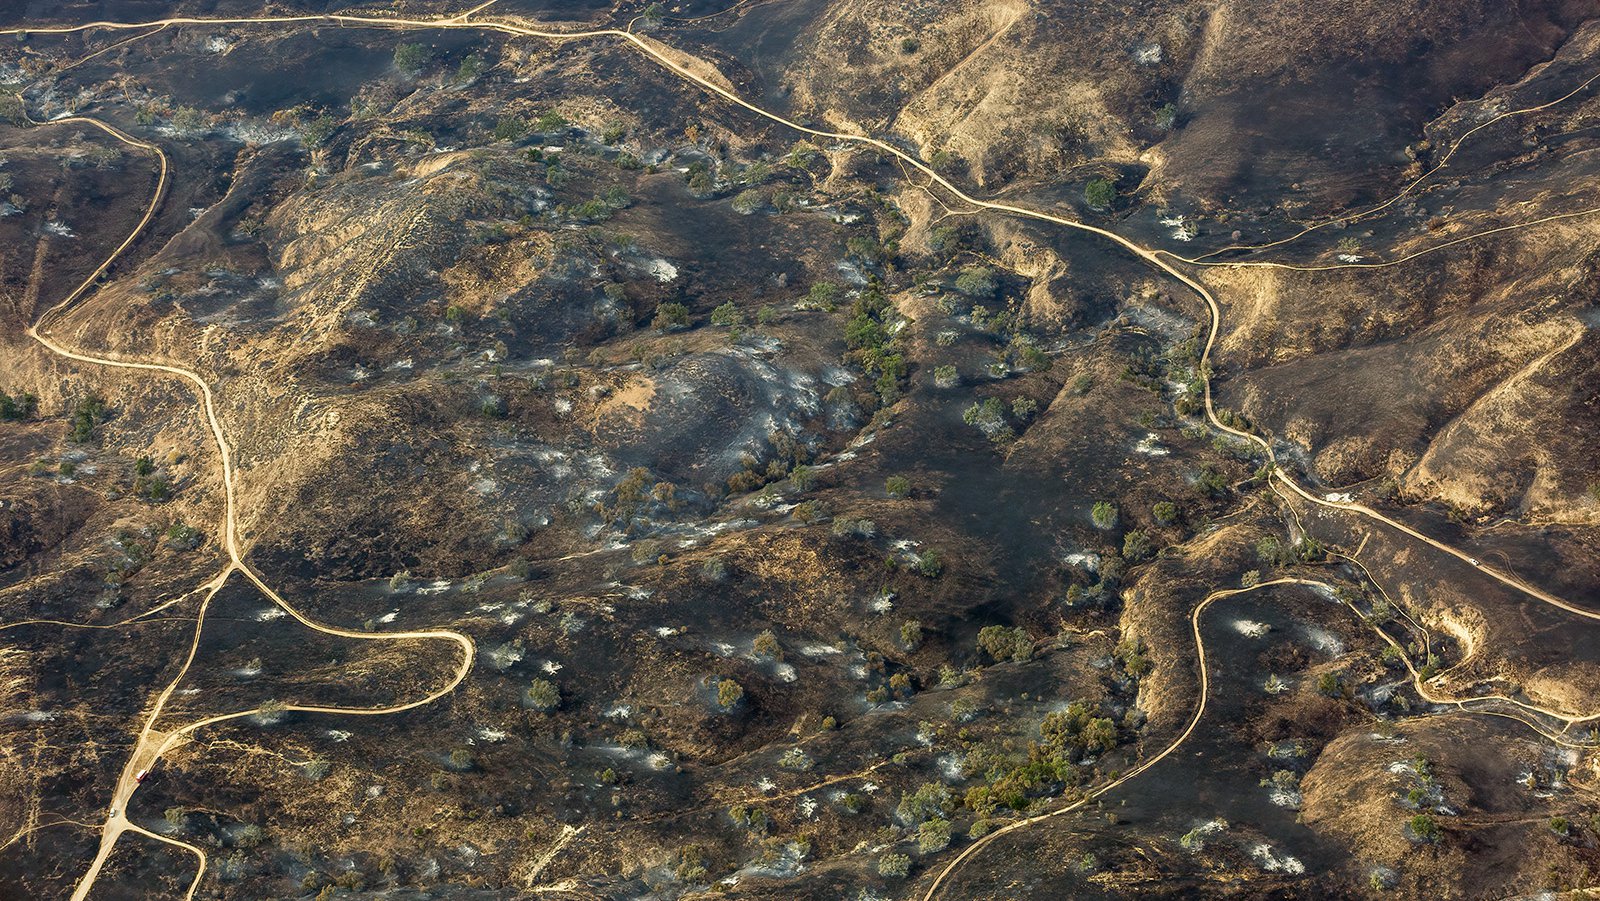 The Woolsey Fire burned nearly everything in its path, leaving the Las Virgenes Canyon Open Space Preserve a charred and desolate wasteland. This aerial photograph captures the utter devastation caused by one of California’s worst fire disasters.